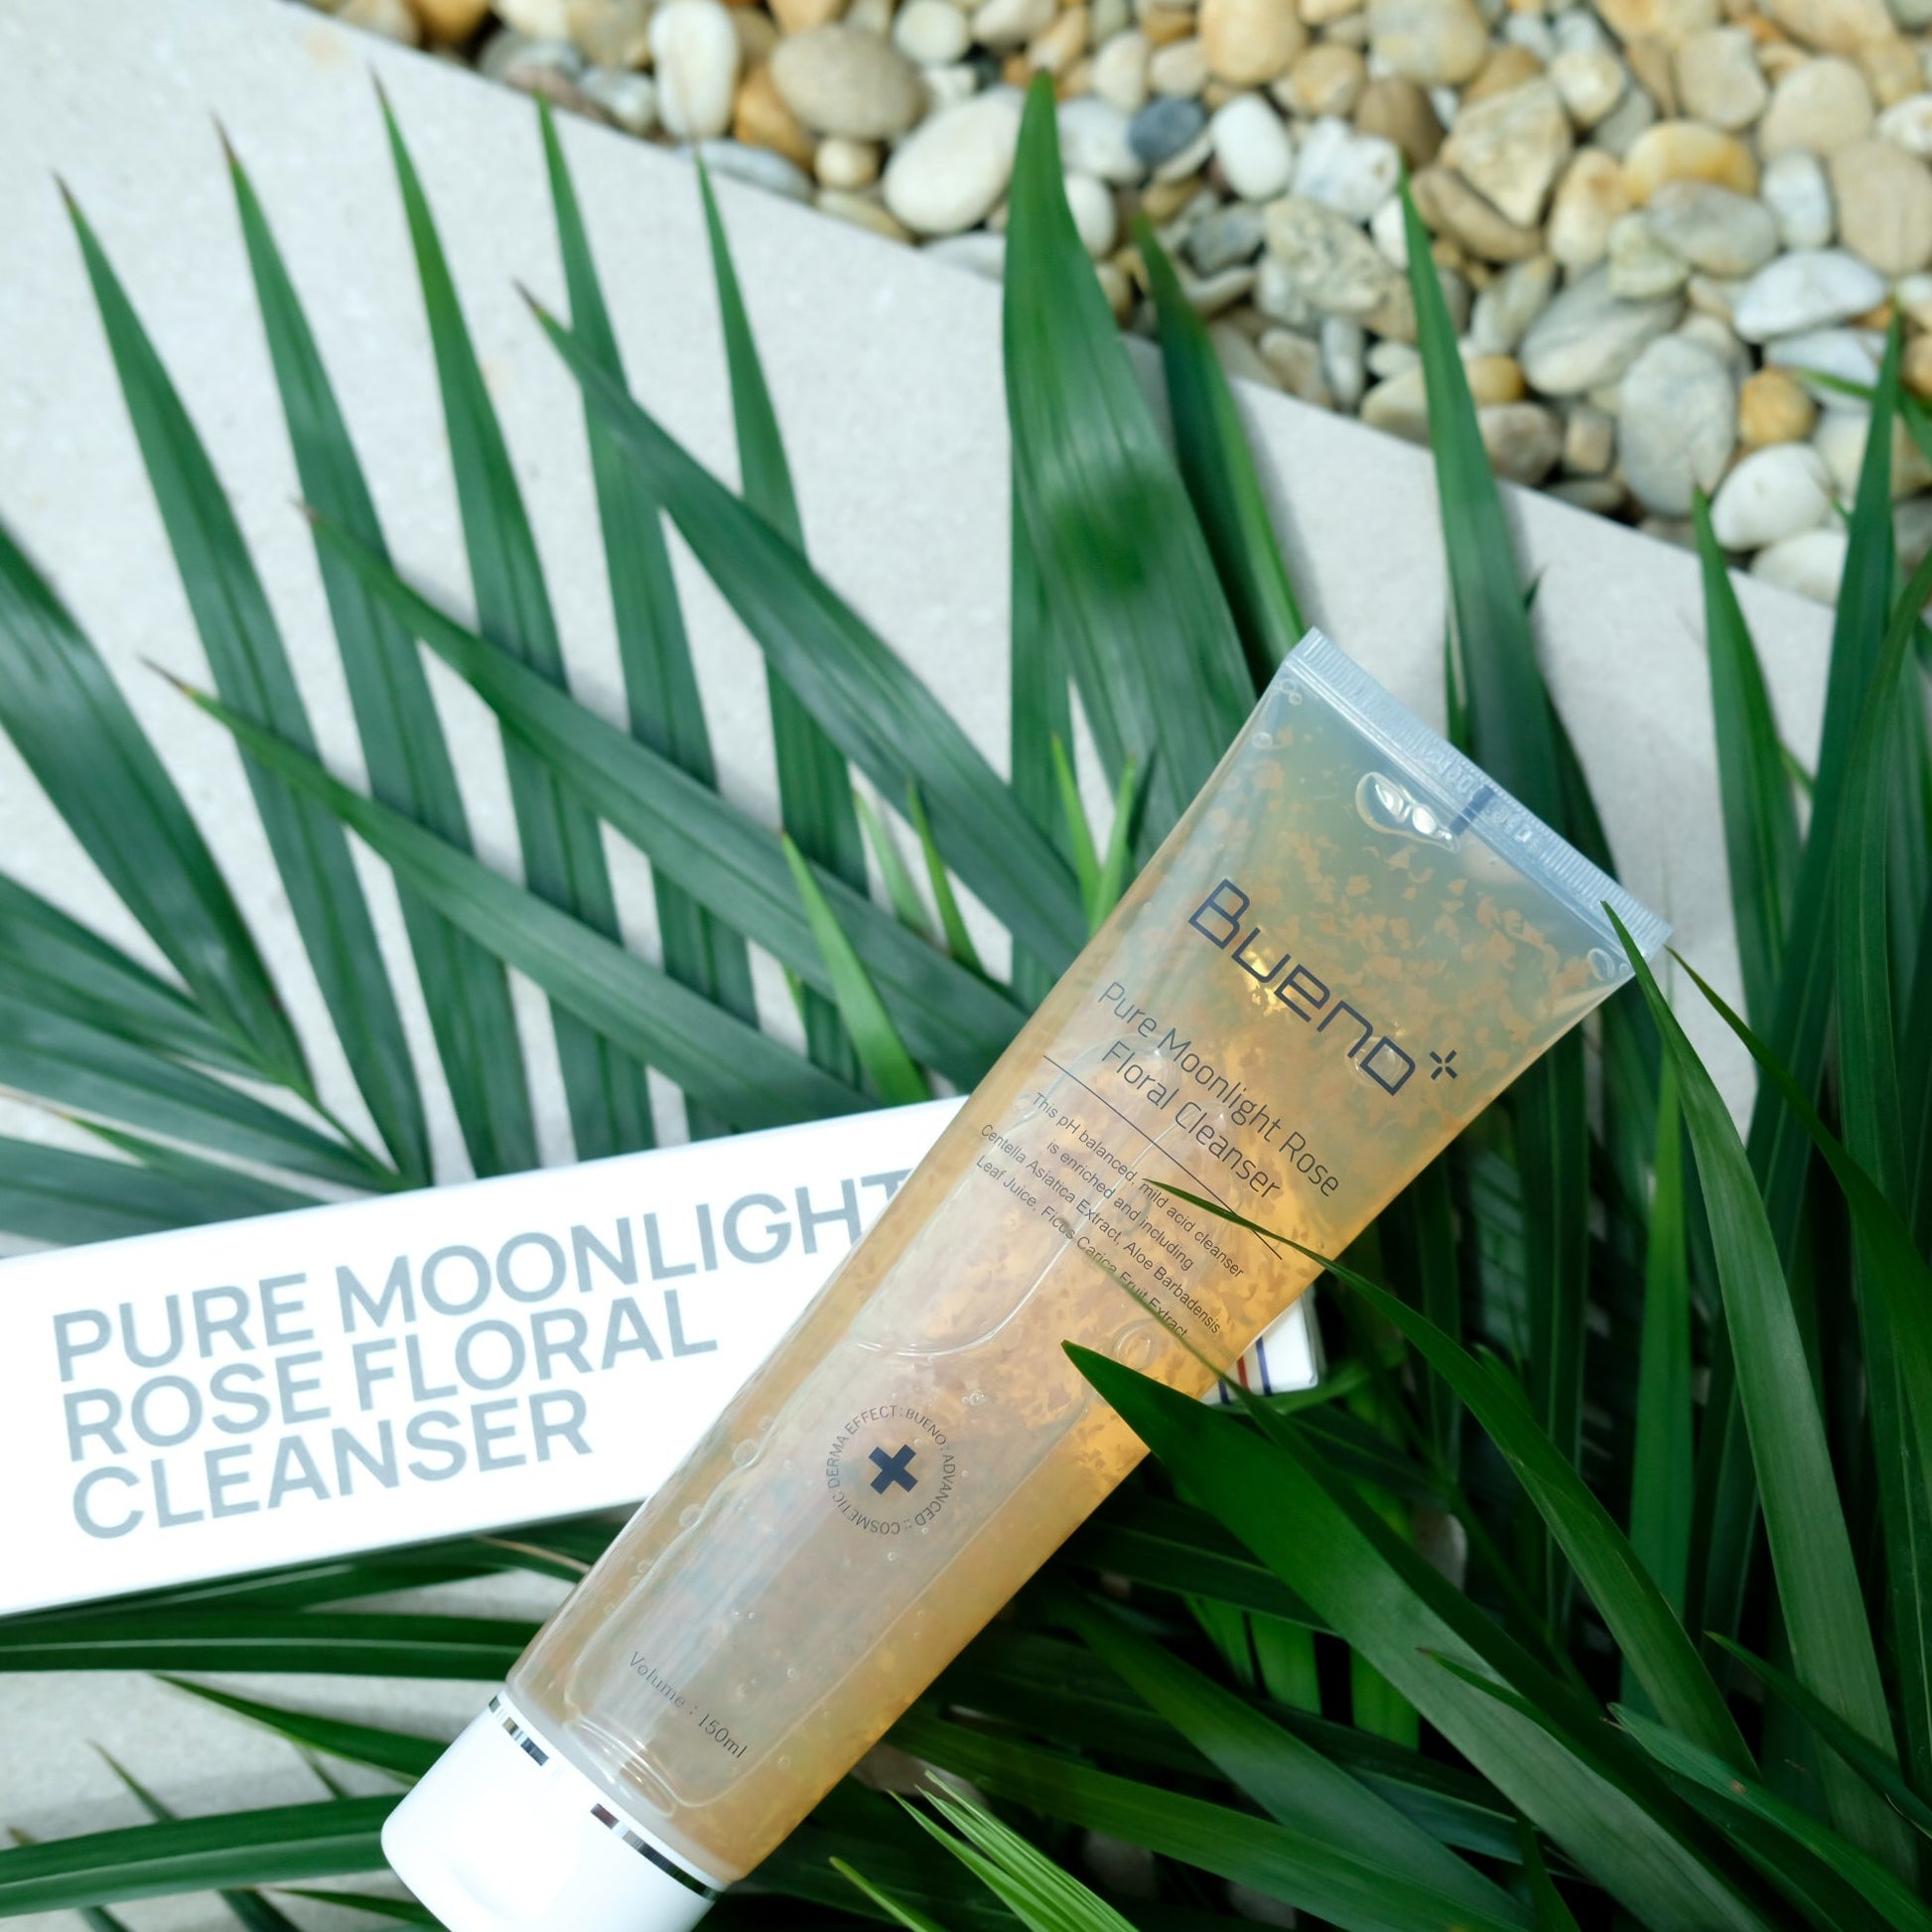 bueno-pure-moonlight-rose-floral-cleanser